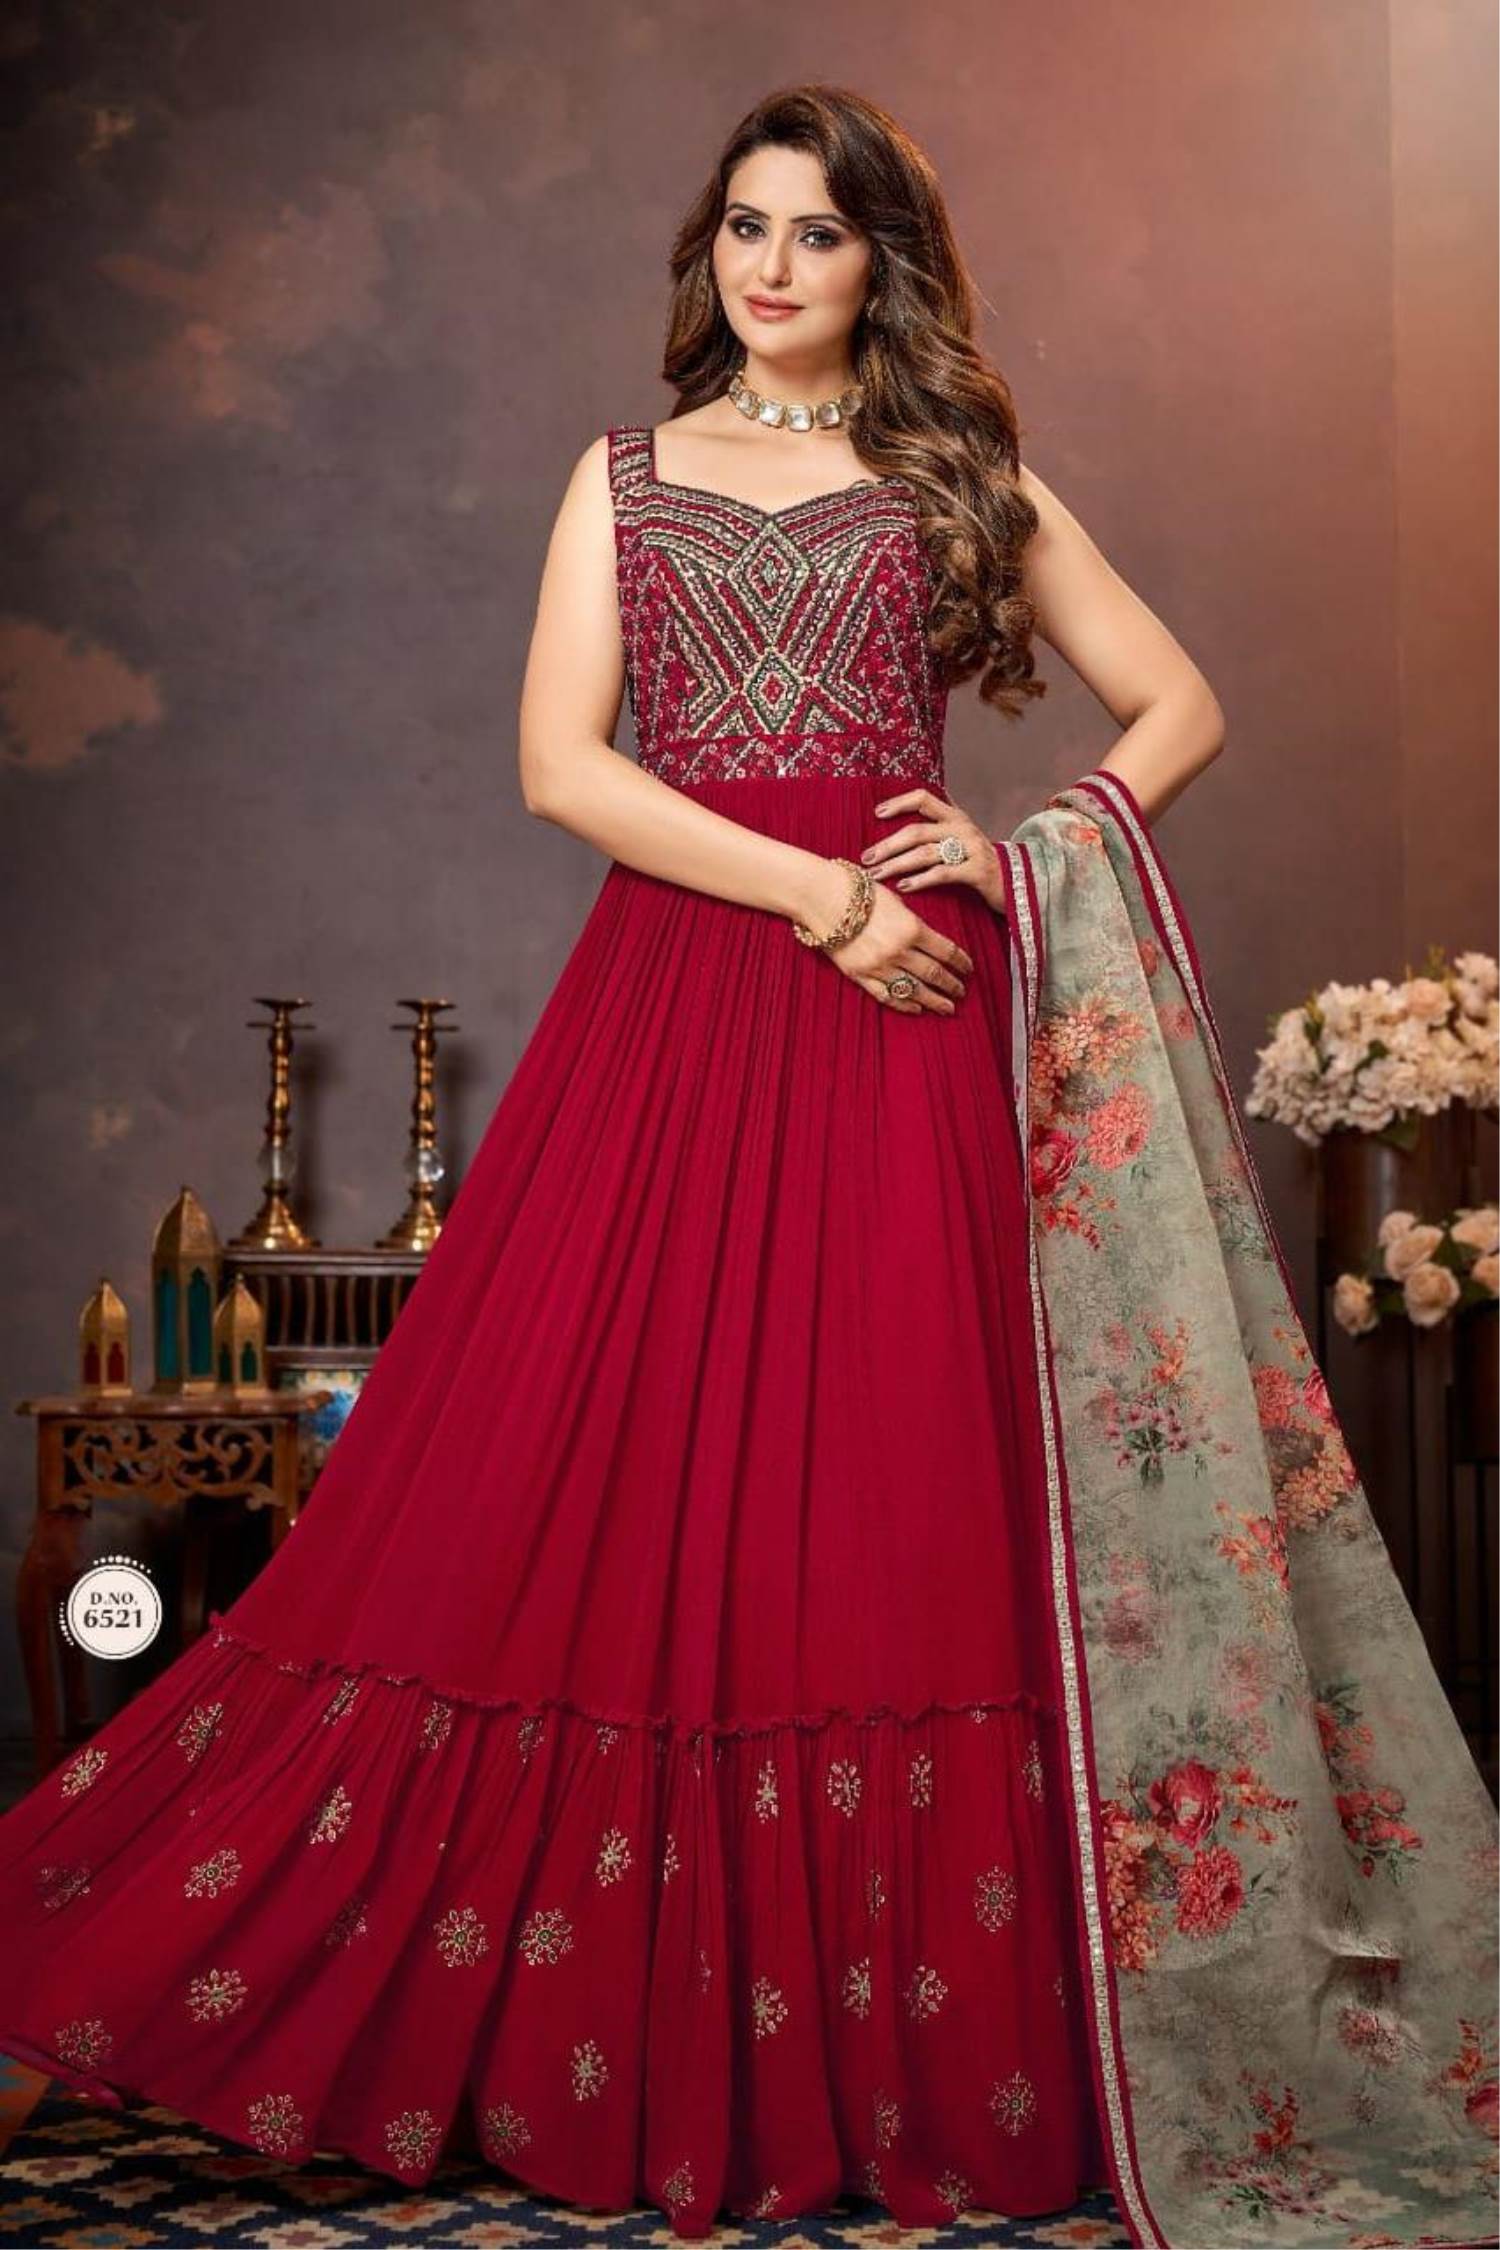 Buy JETHVA Maroon Colour Anarkali Long Gown For Girls And Women (L,Maroon)  at Amazon.in